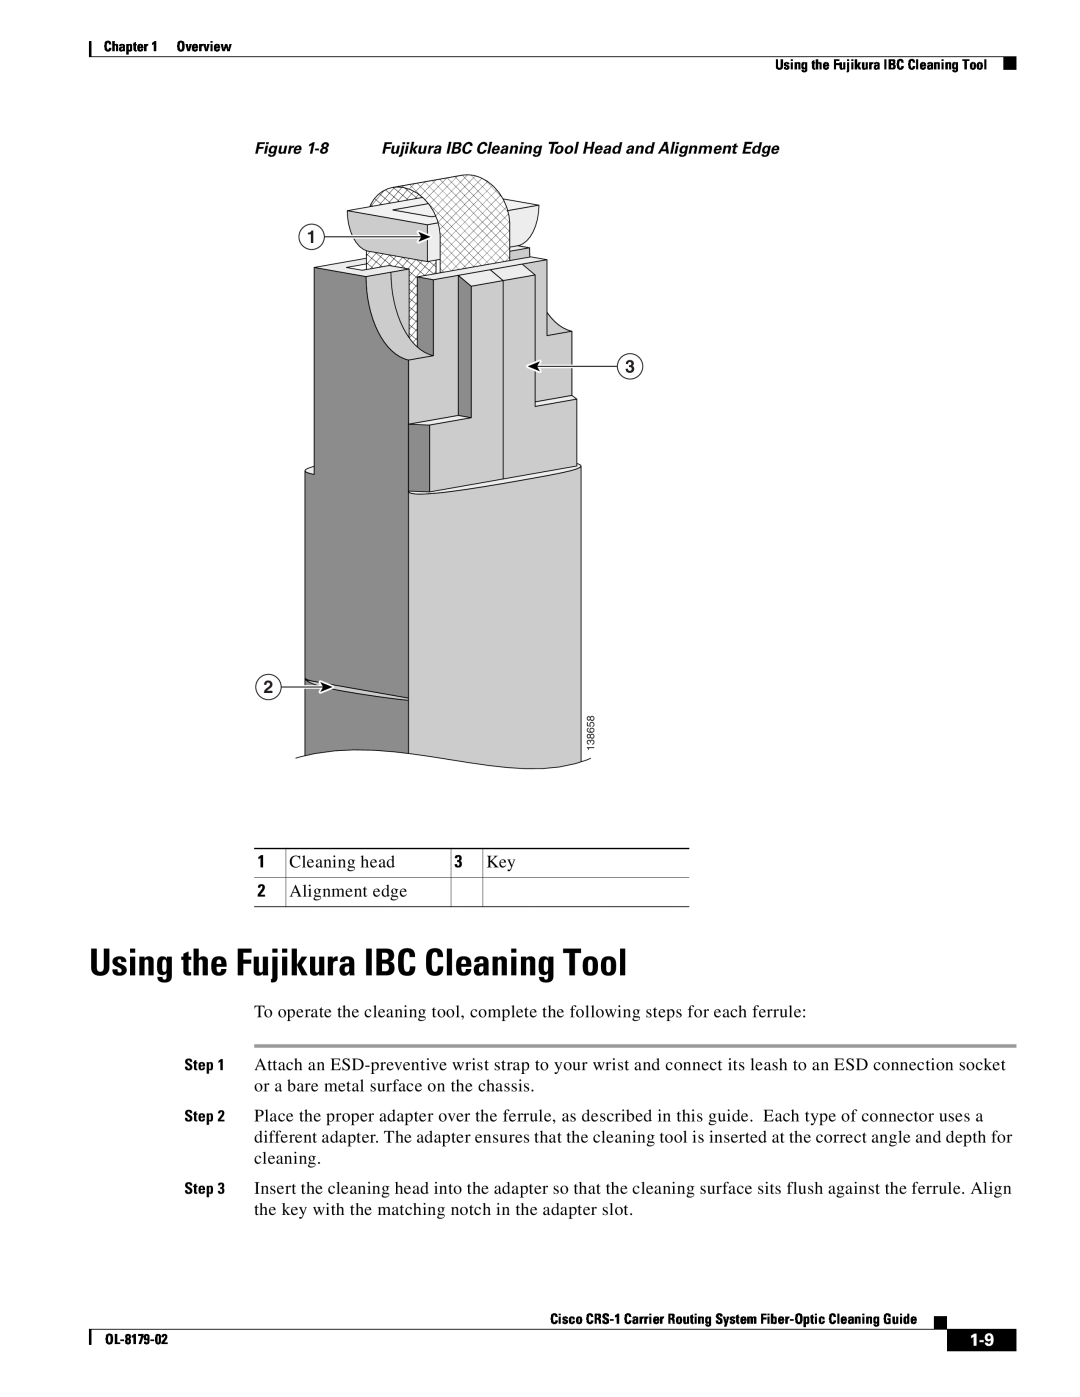 Cisco Systems CRS-1 manual Using the Fujikura IBC Cleaning Tool, 1 3 2 